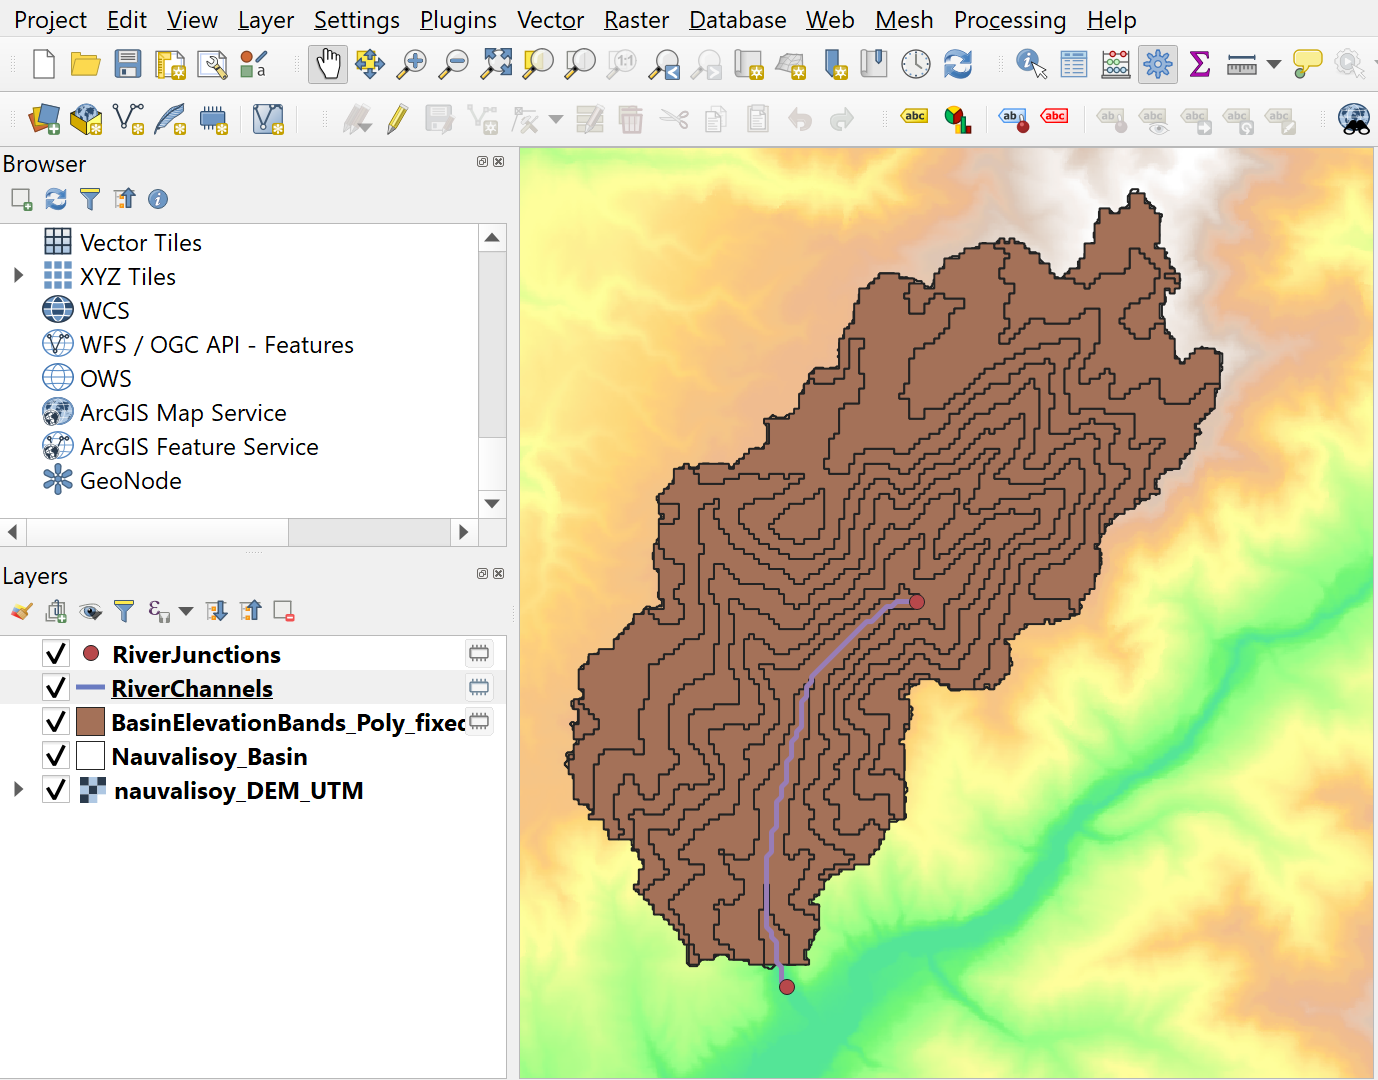 Raw output of the QGIS model chain to derive the GIS layers for import into RS Minerve.